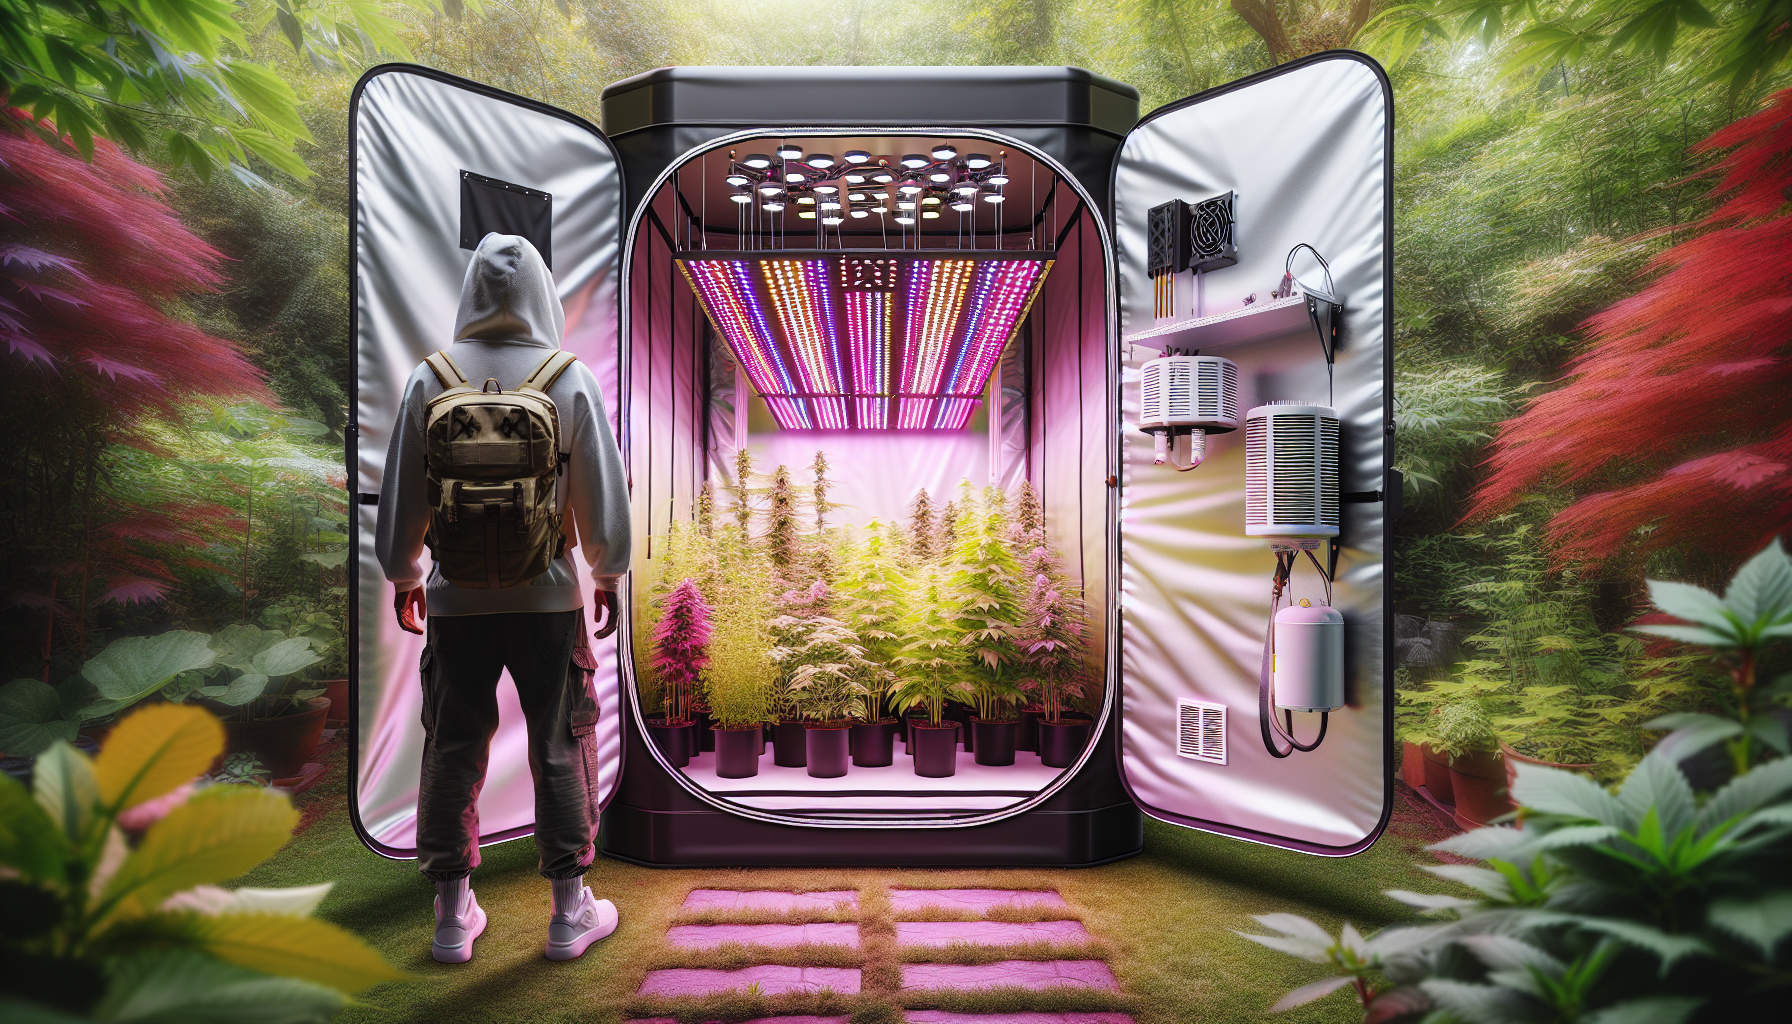 Key considerations for buying a grow tent